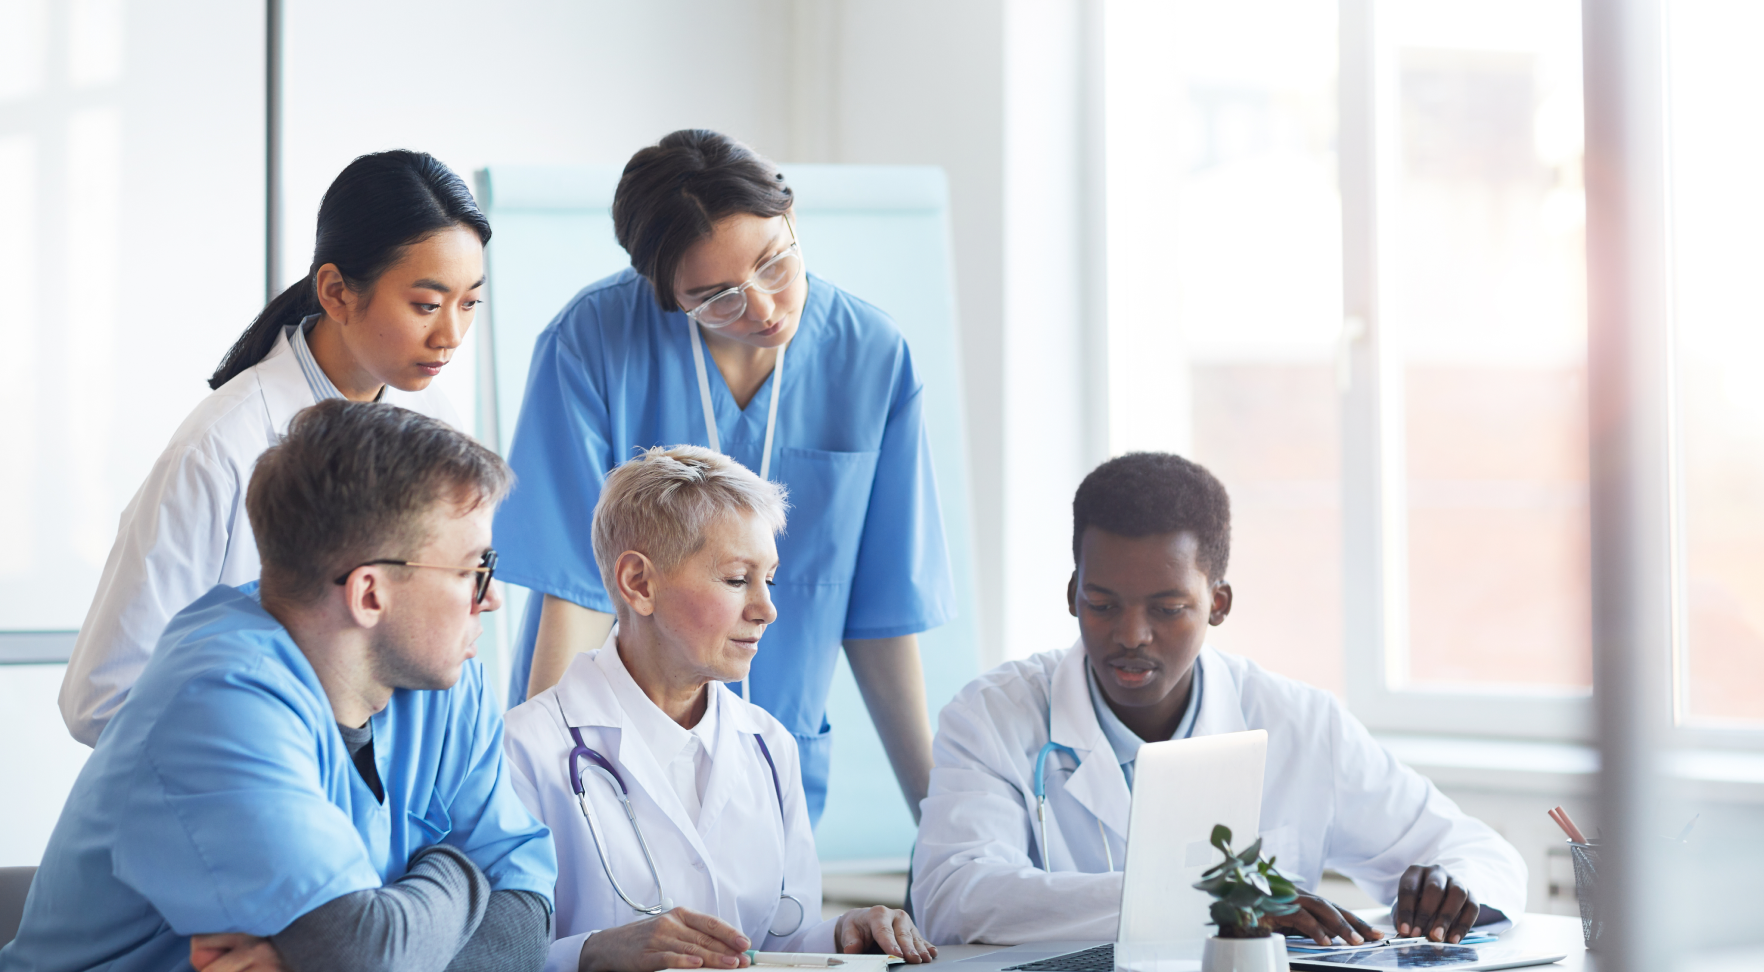 How can group practices set themselves apart in a competitive healthcare industry?